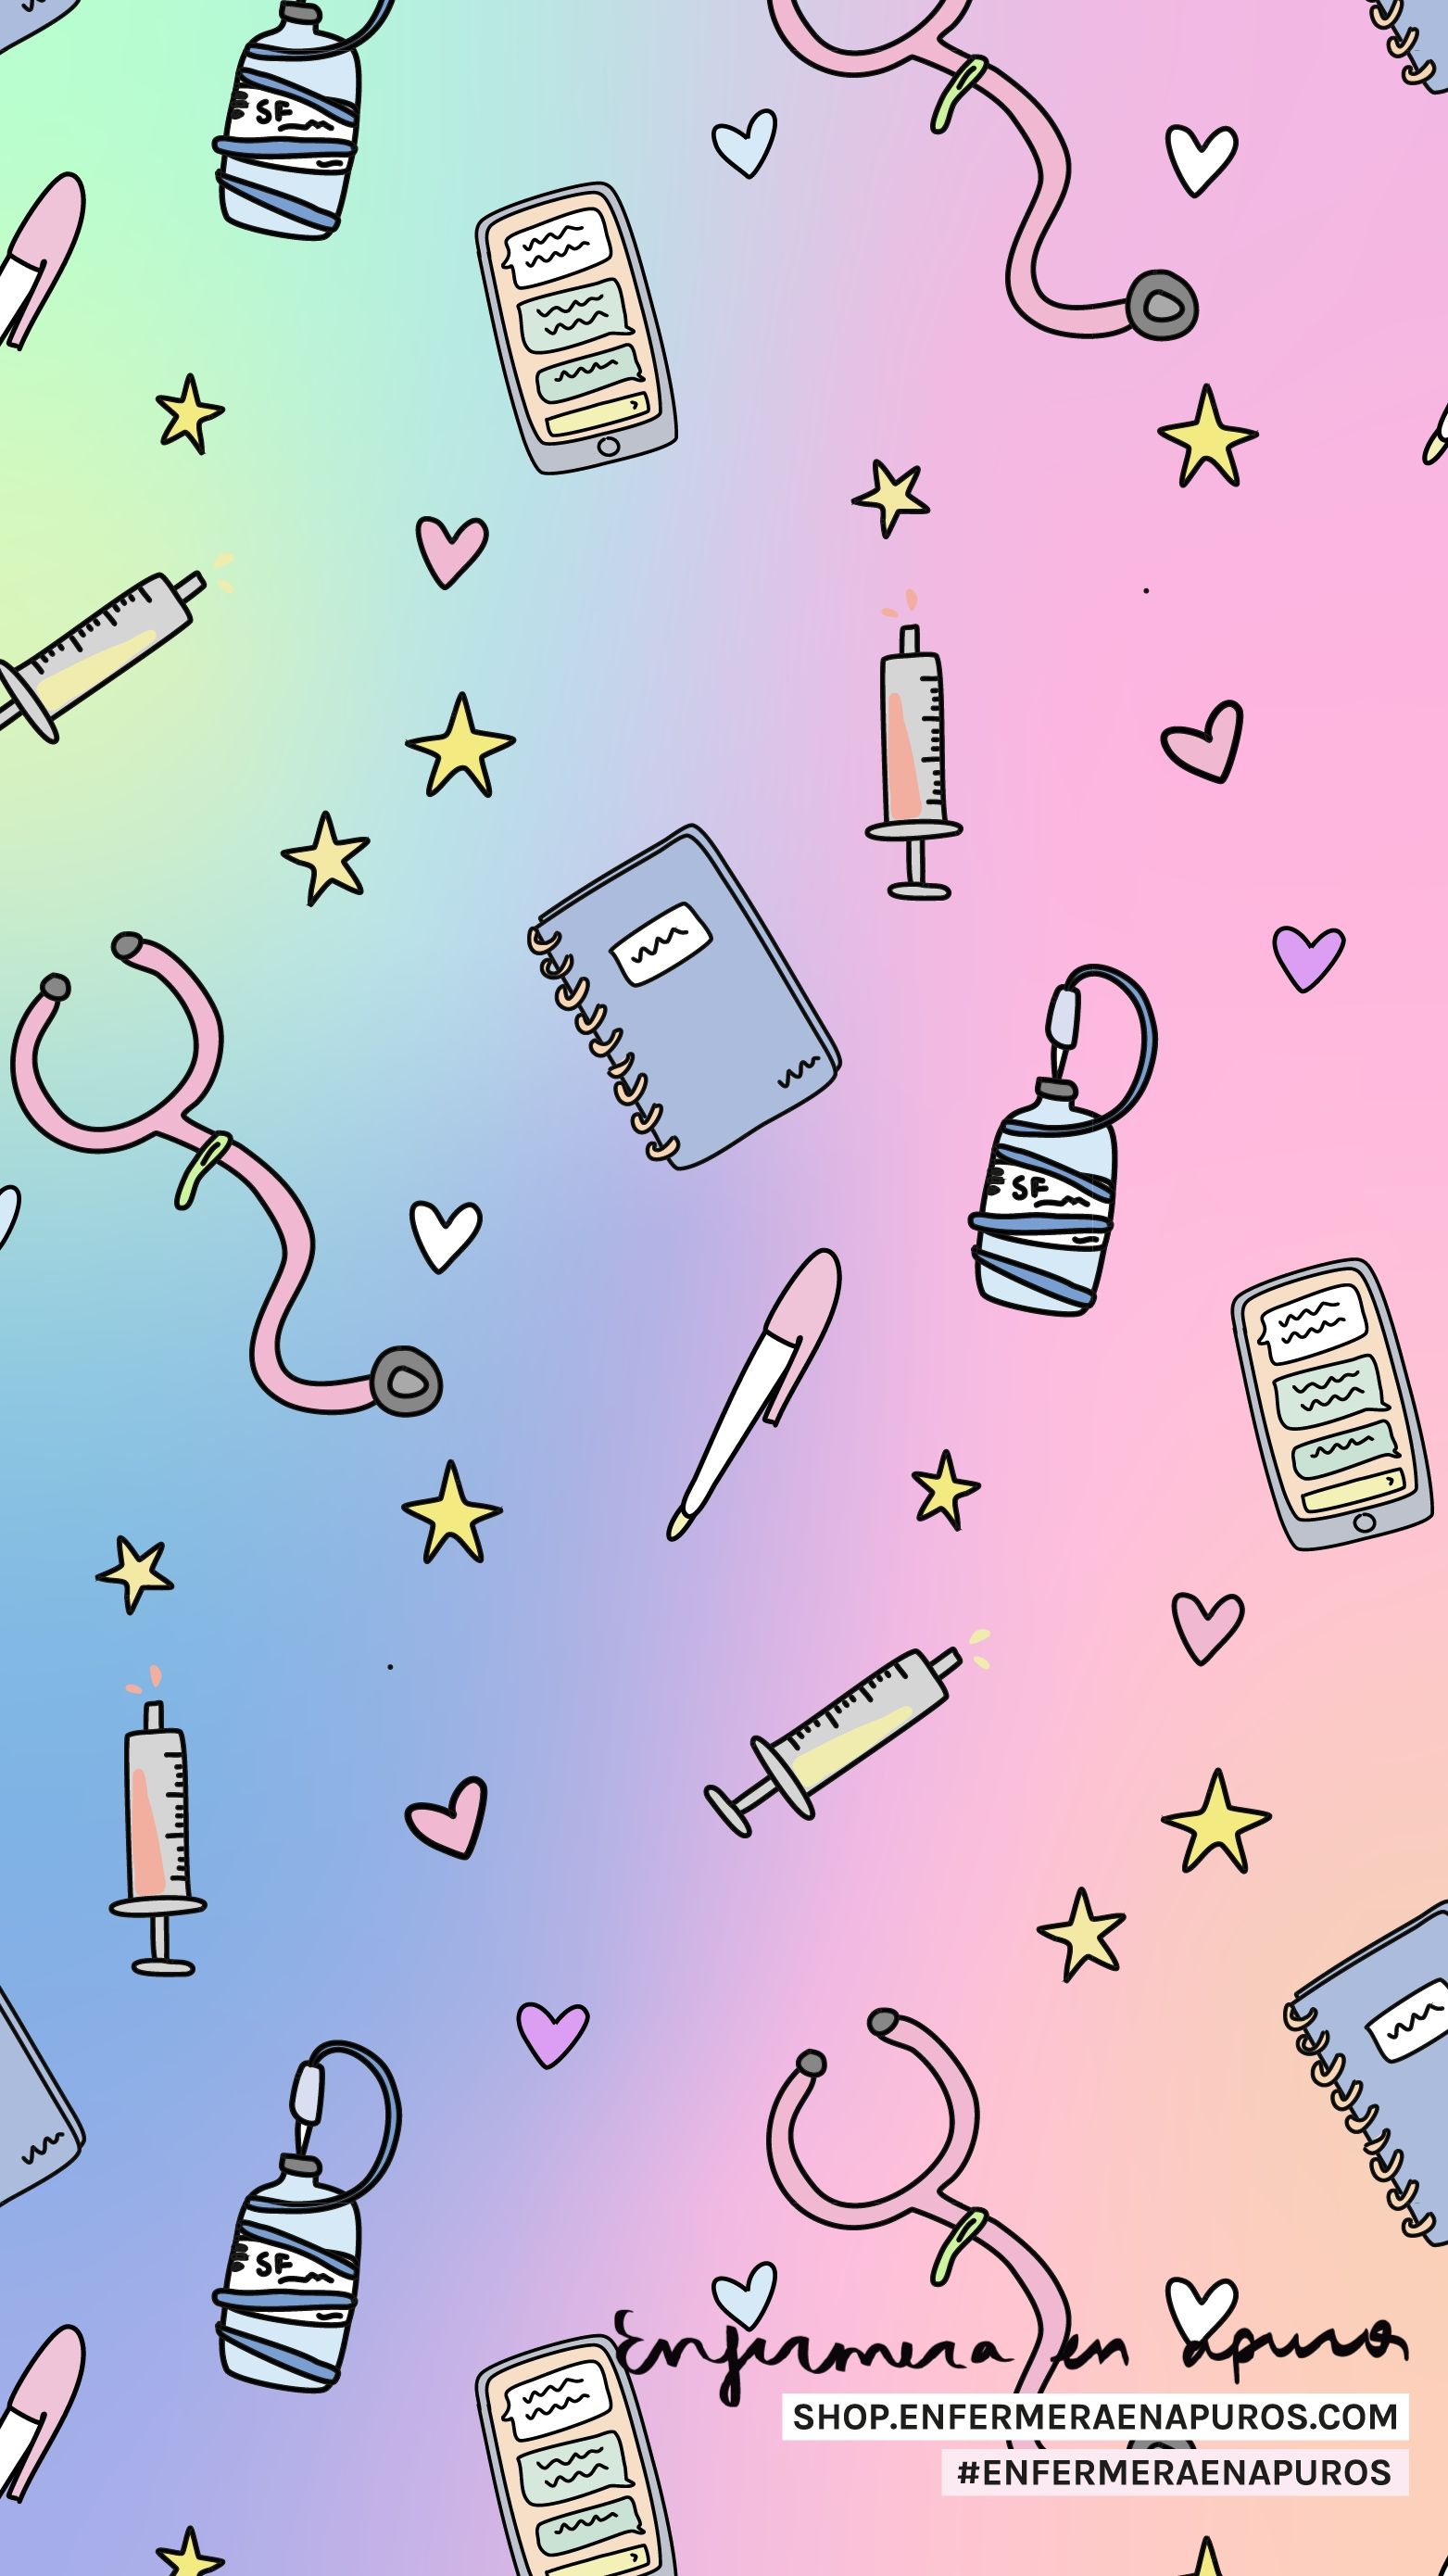 A pattern of various medical items on rainbow background - Nurse